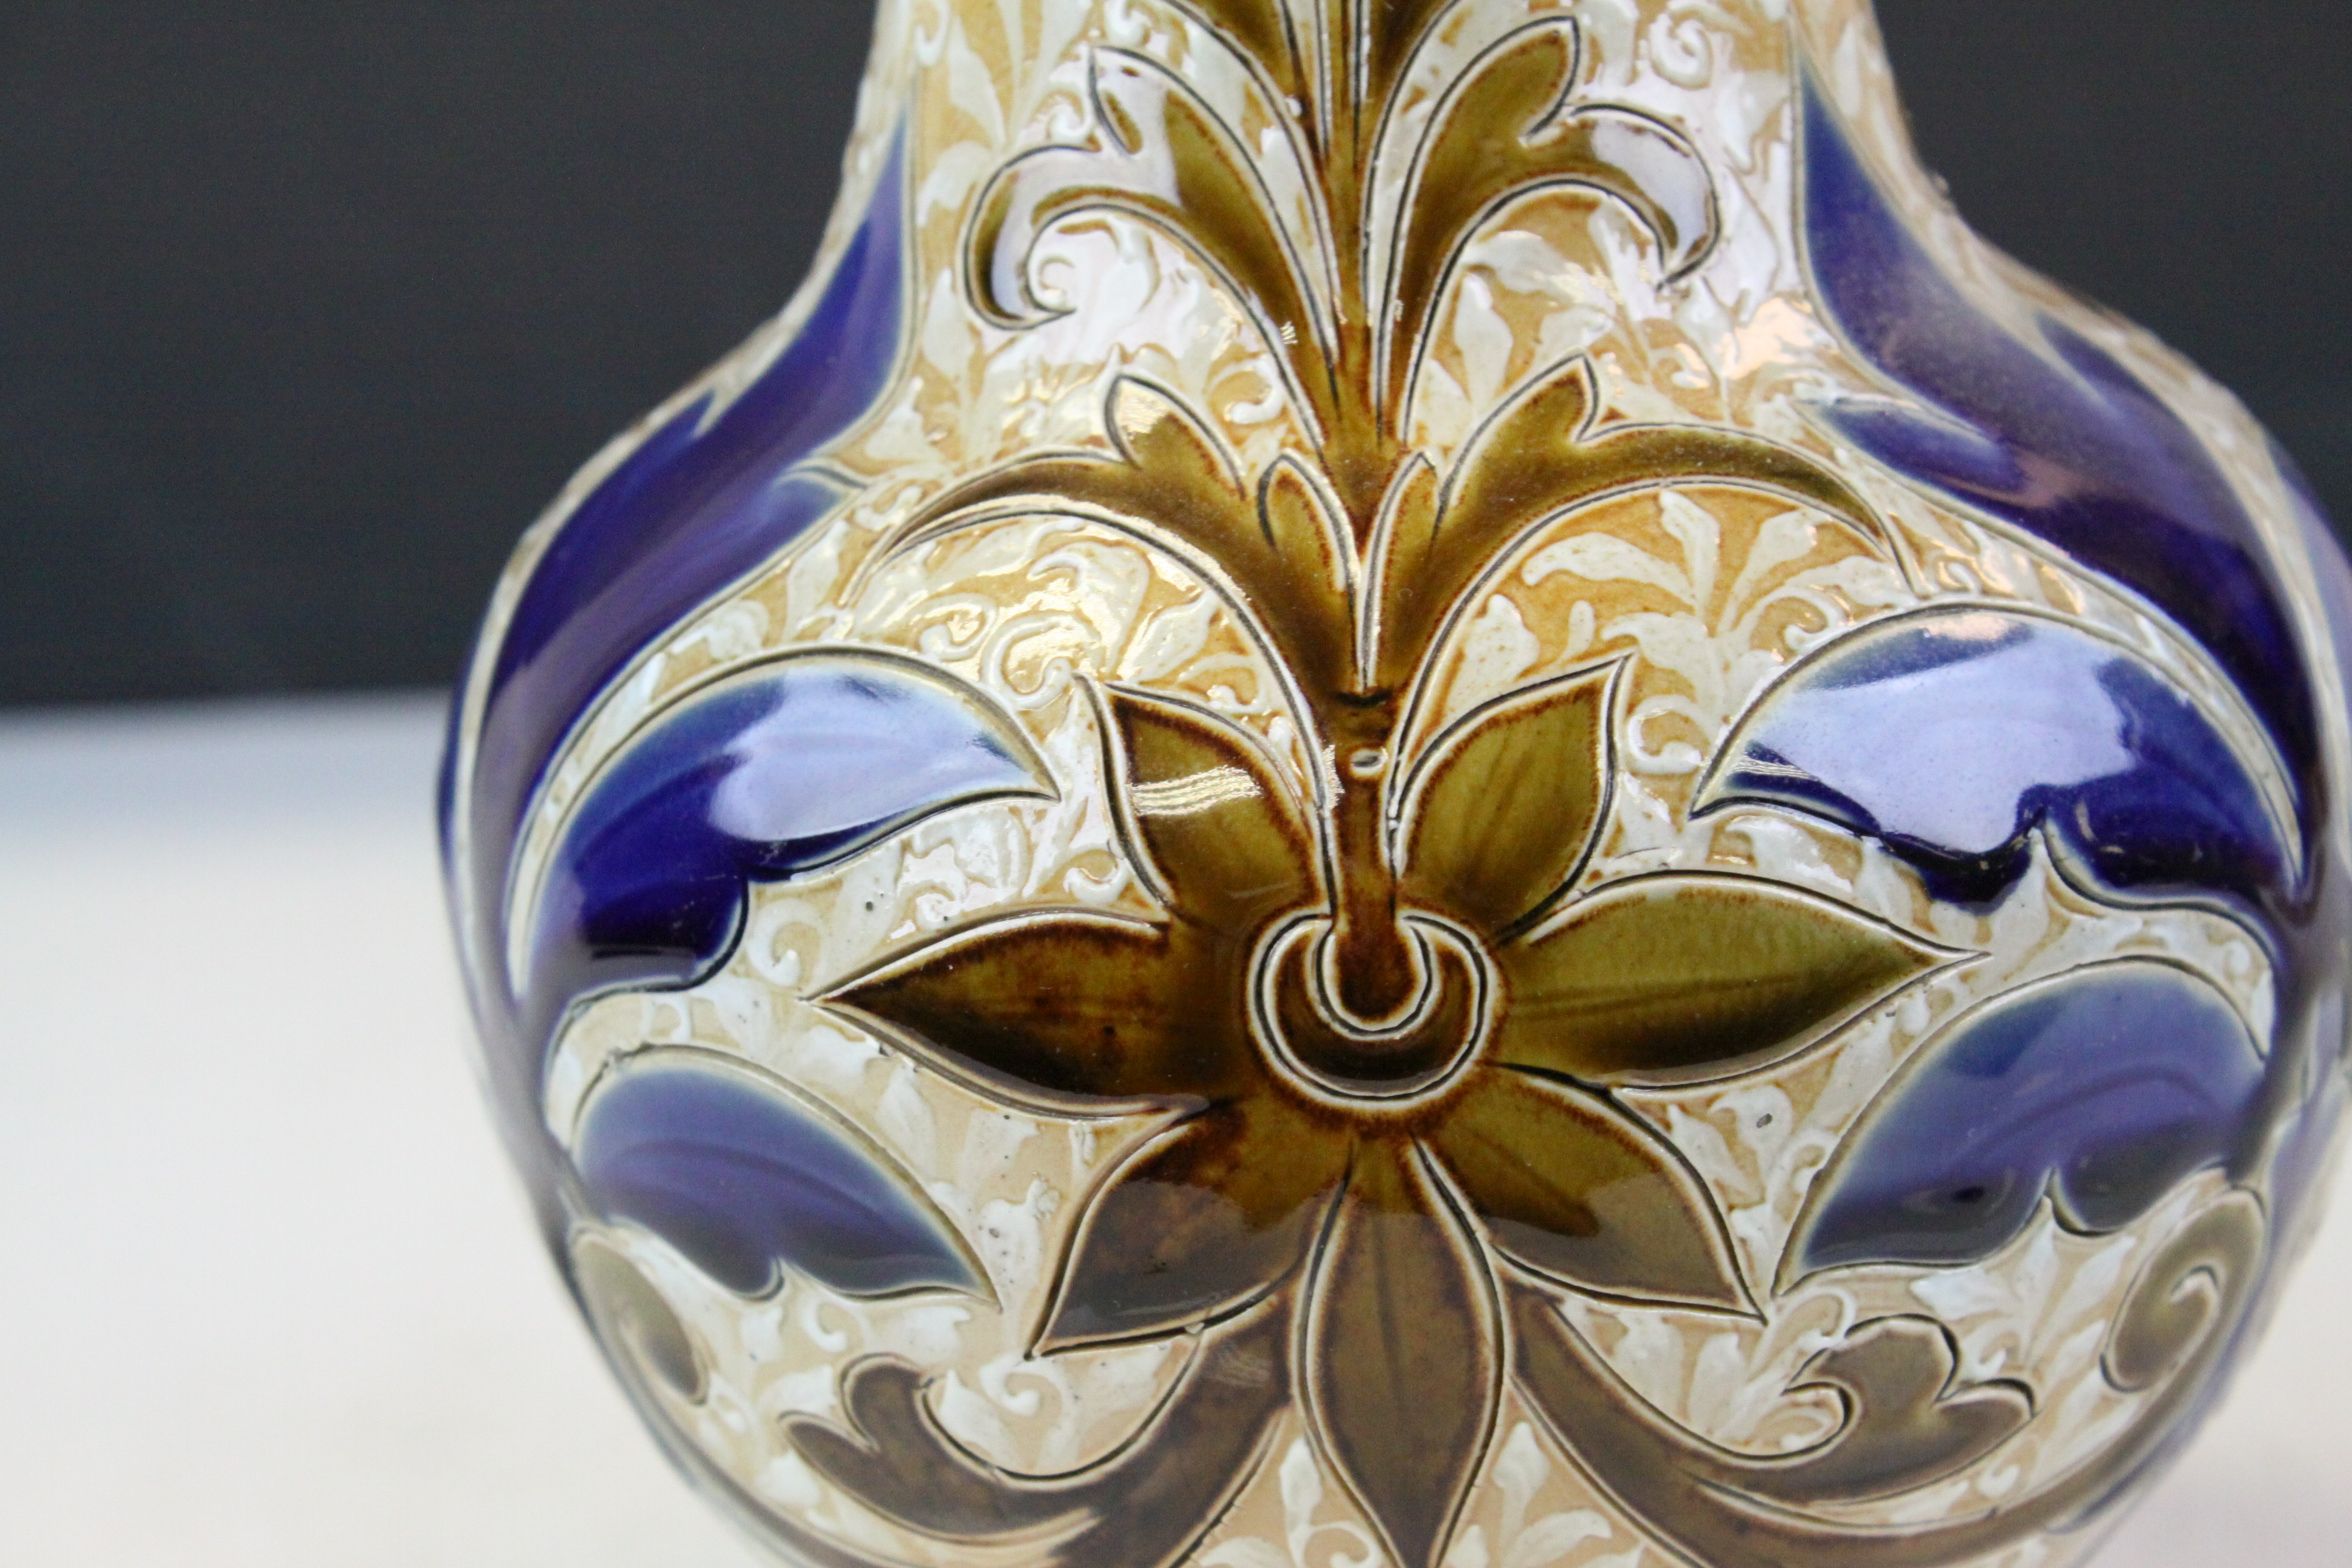 Doulton Lambeth late 19th century vase profusely decorated with leaf and flower decoration, - Image 4 of 10